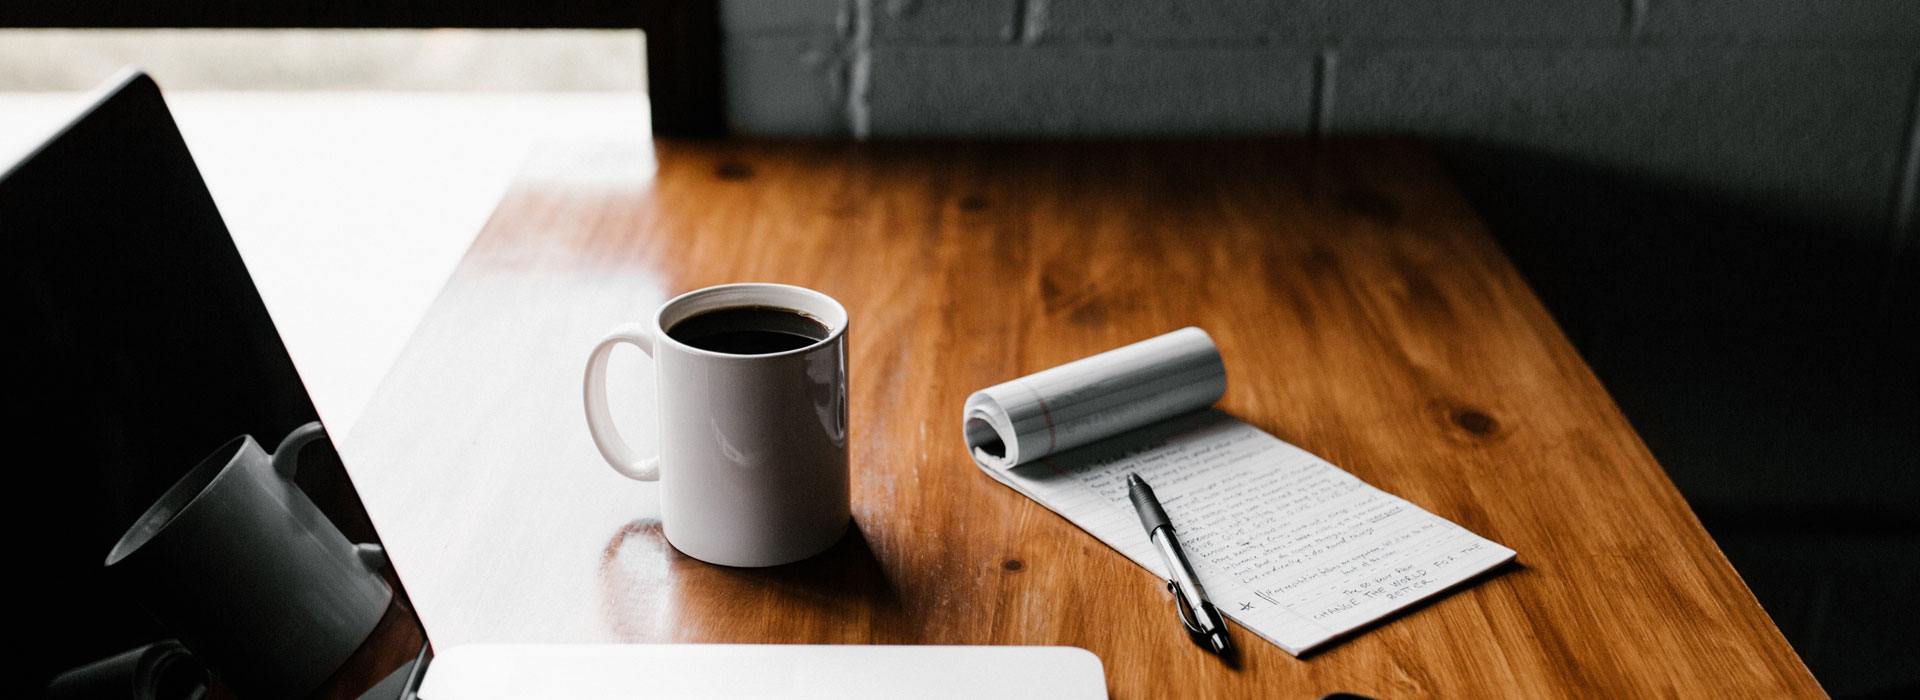 Notepad with writing, a pen, a laptop, and a black coffee in a white mug sit on a wooden desk tabletop